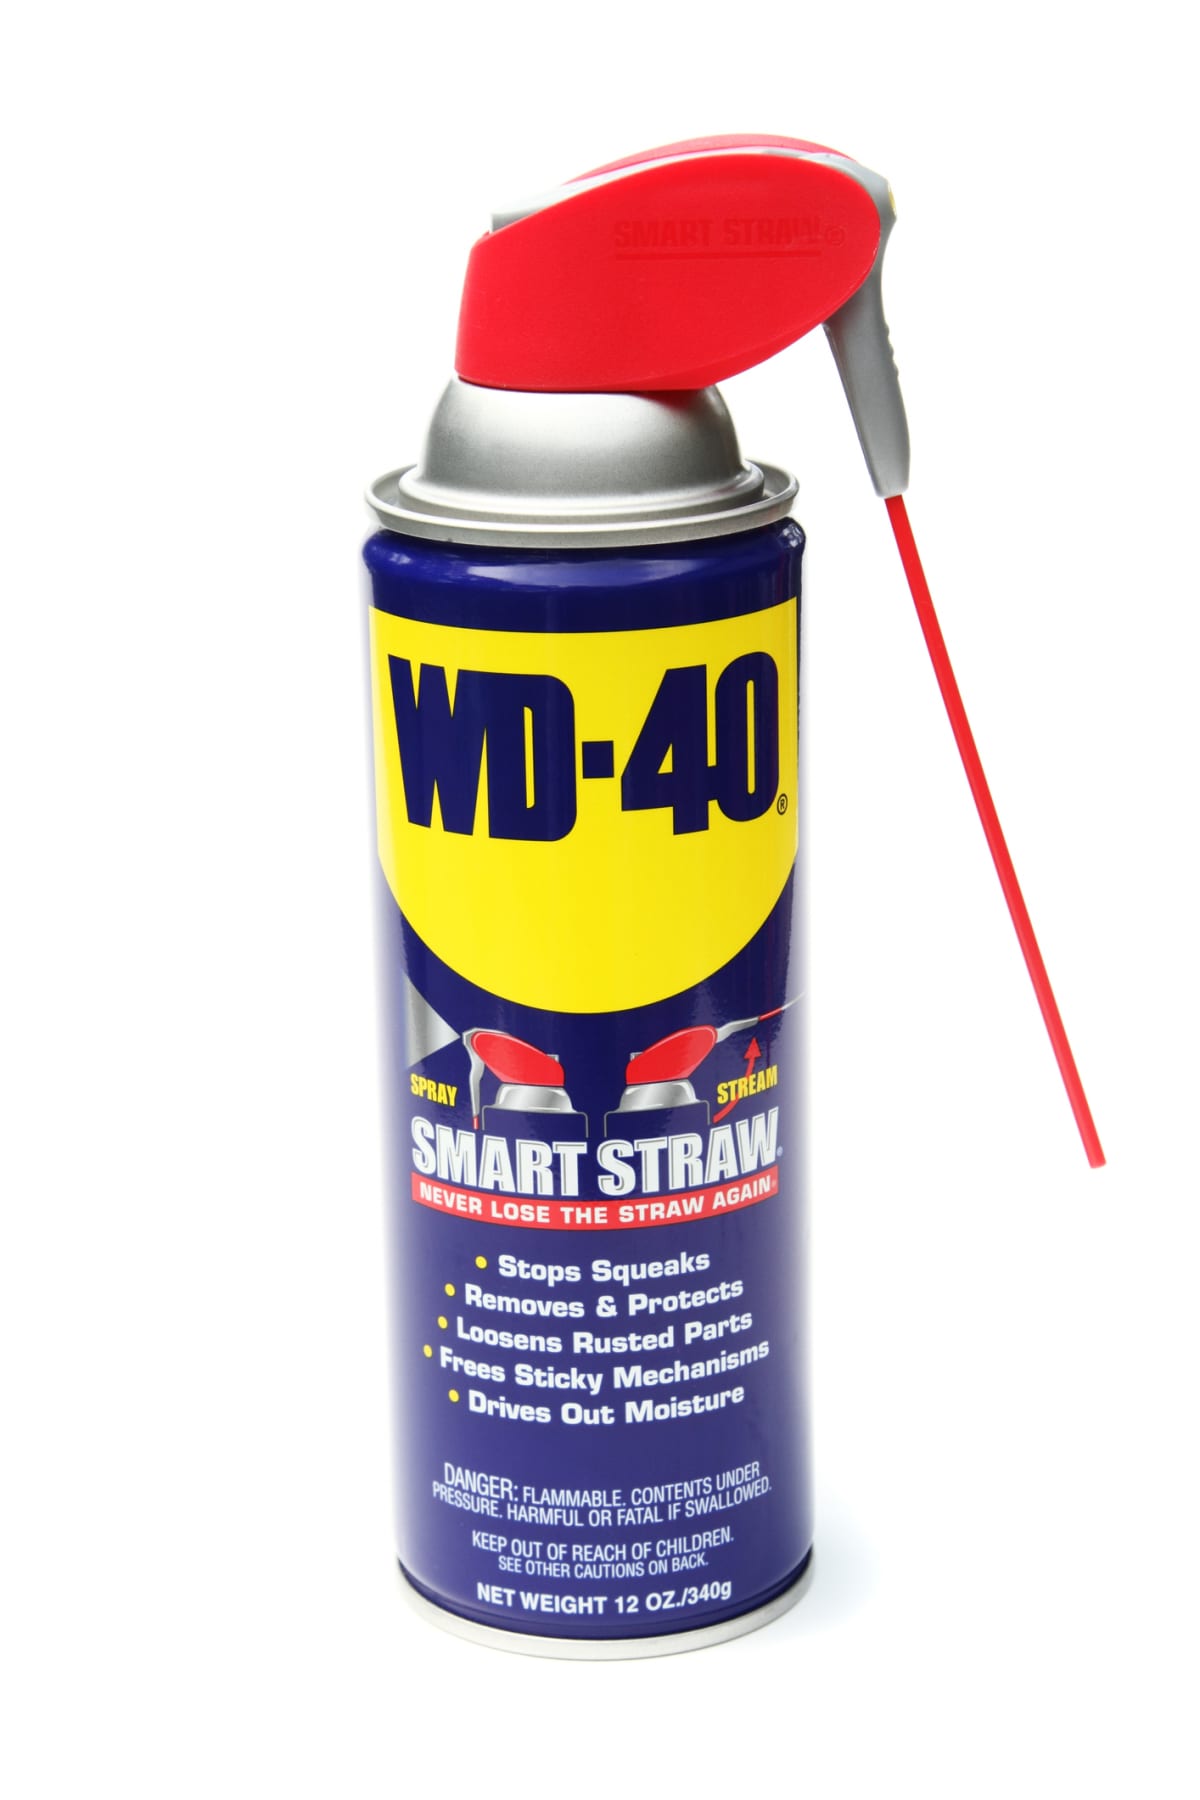 A can of WD-40.